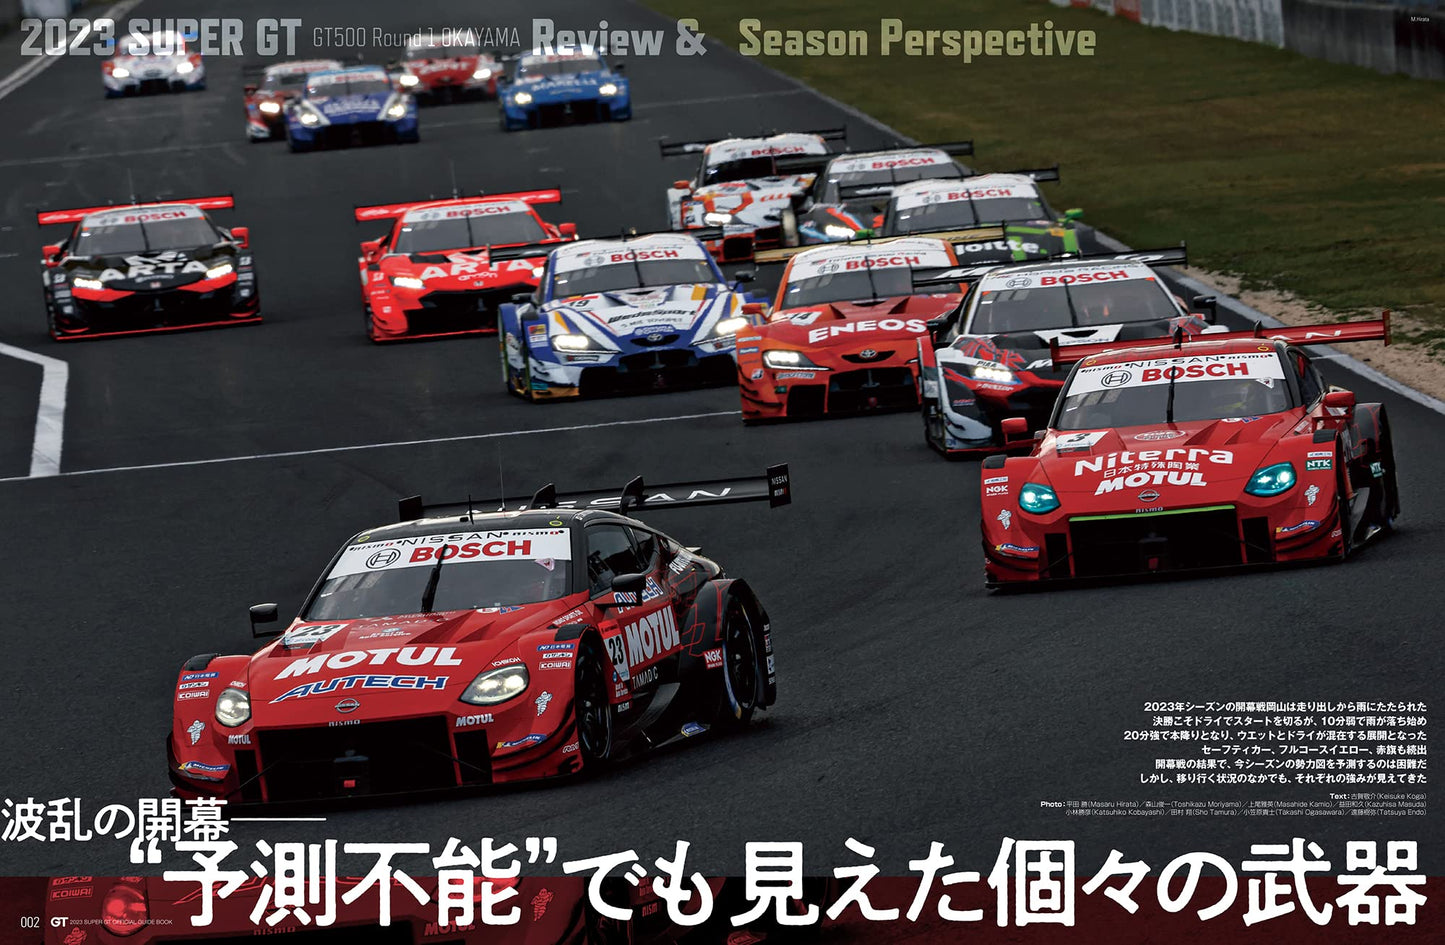 2023 Super GT Official Guide Book